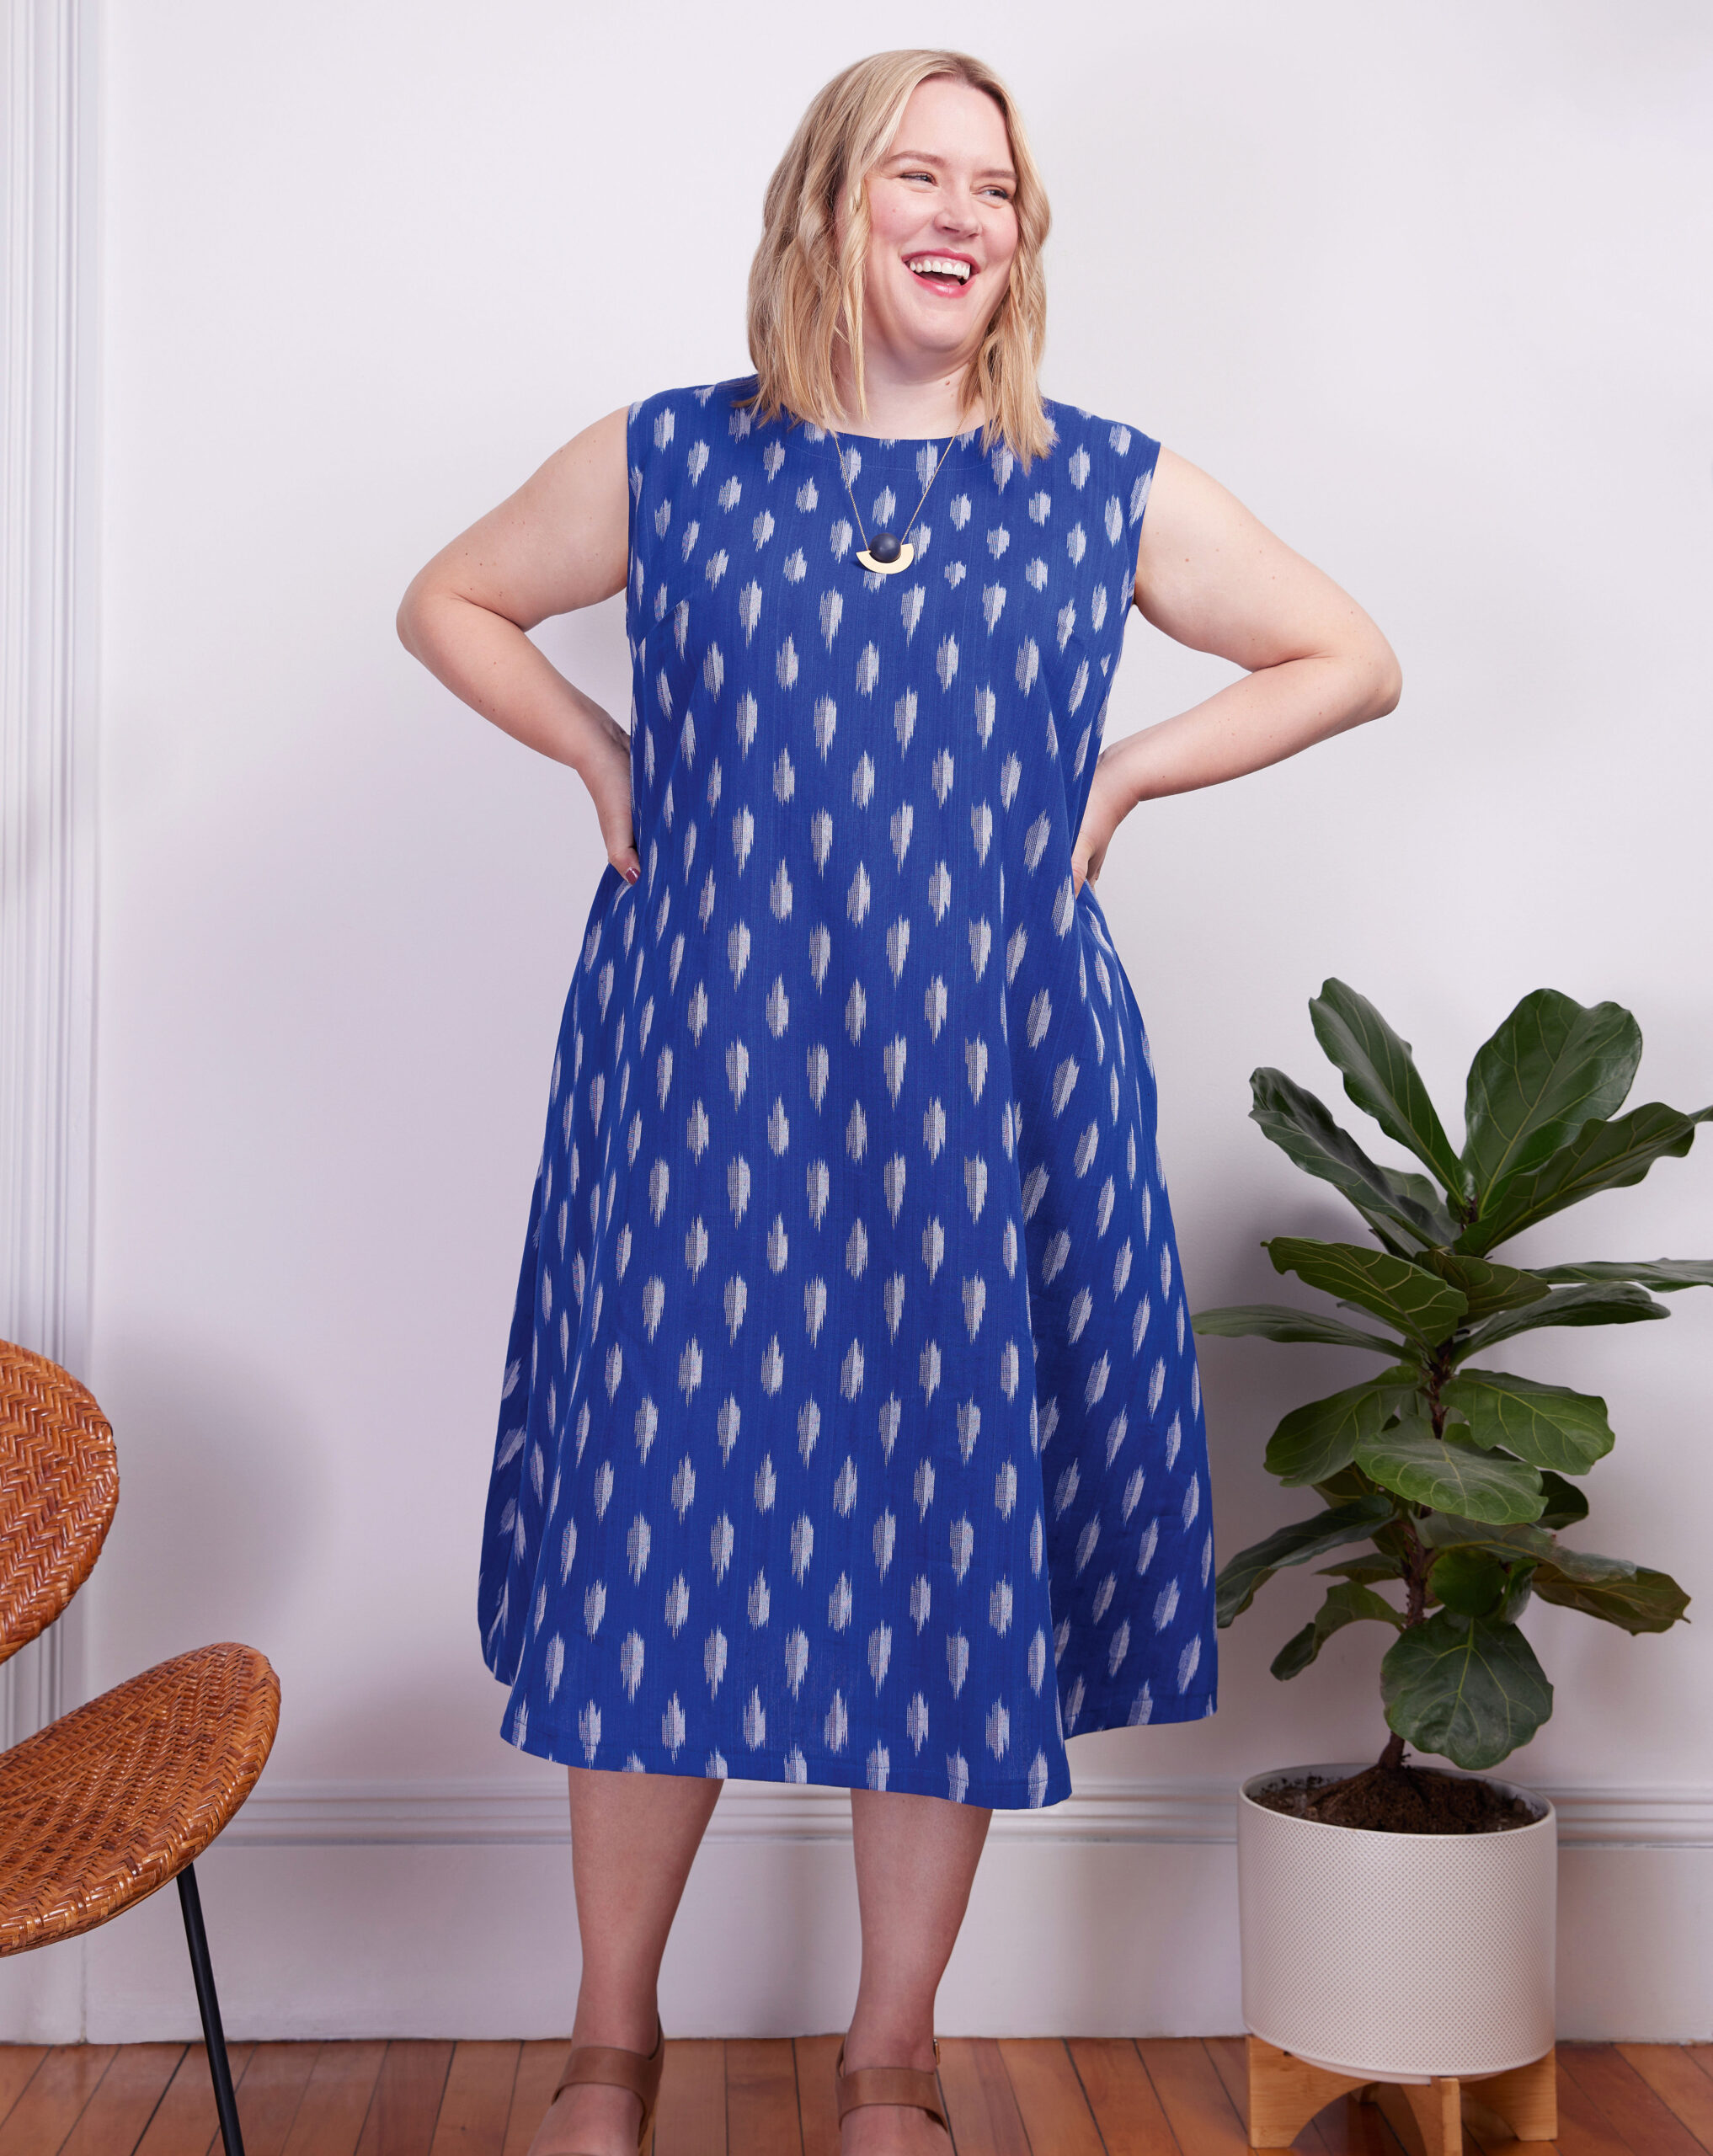 Tunic sewing pattern  Wardrobe By Me - We love sewing!